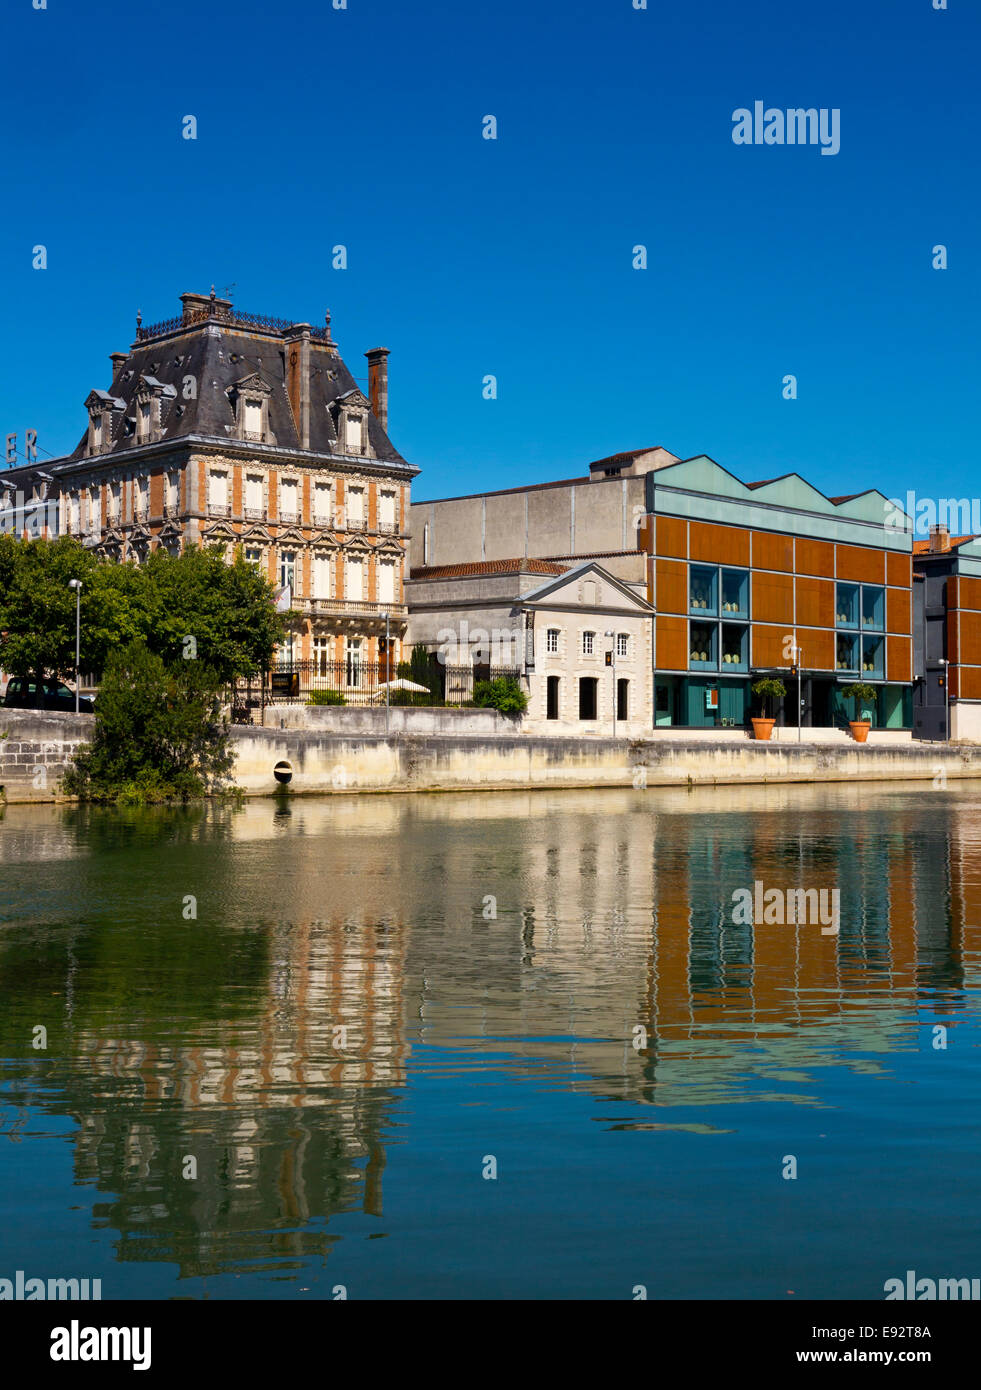 The Courvoisier cognac distillery next to the Charente River in Jarnac the Charente region of south west France Stock Photo